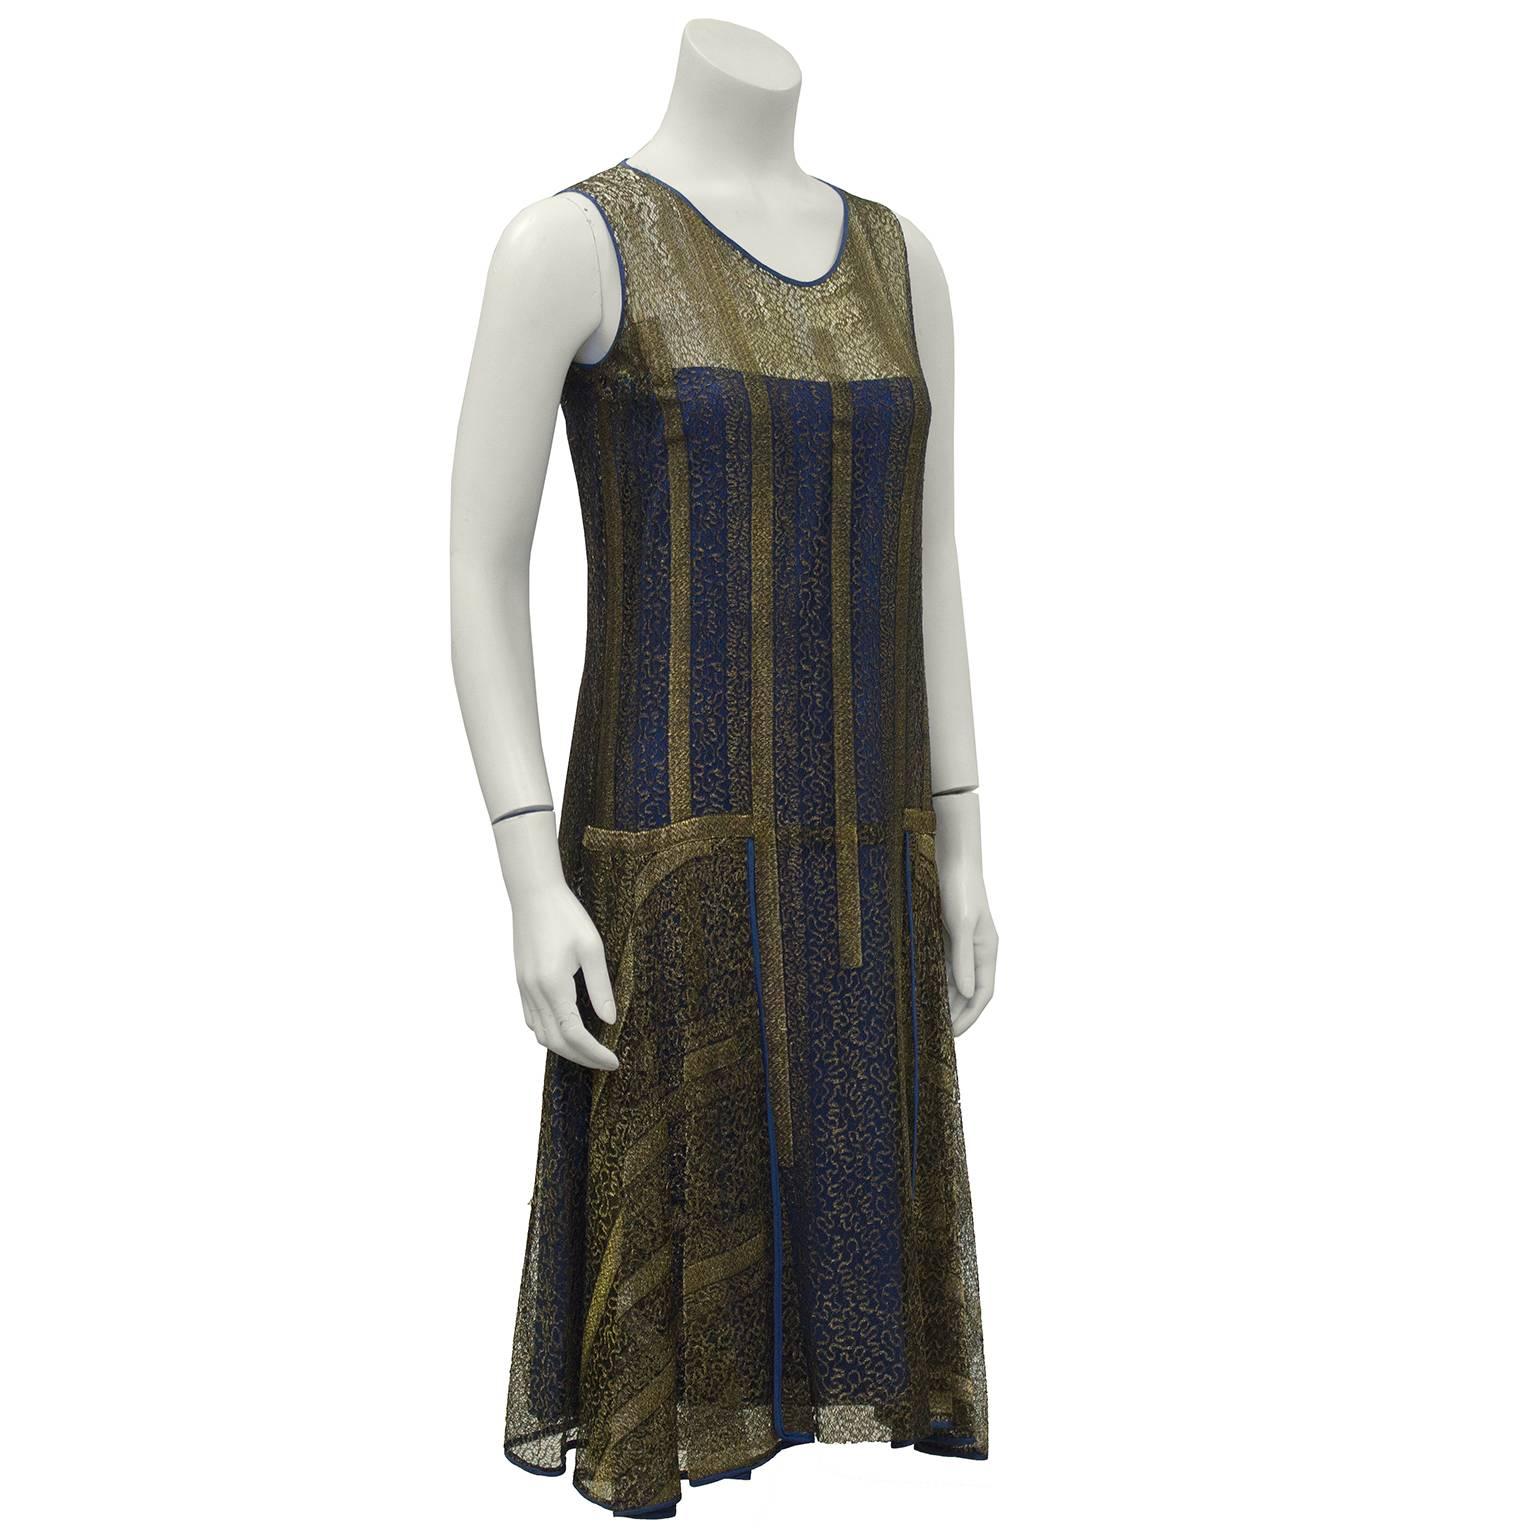 Art Deco era gold lace overlay flapper style dress from the 1920's. The navy silk under layer is attached to the gold lace over layer from the bust to the hem. Lace layer covers the whole topside of the dress from the round neckline down. The lace